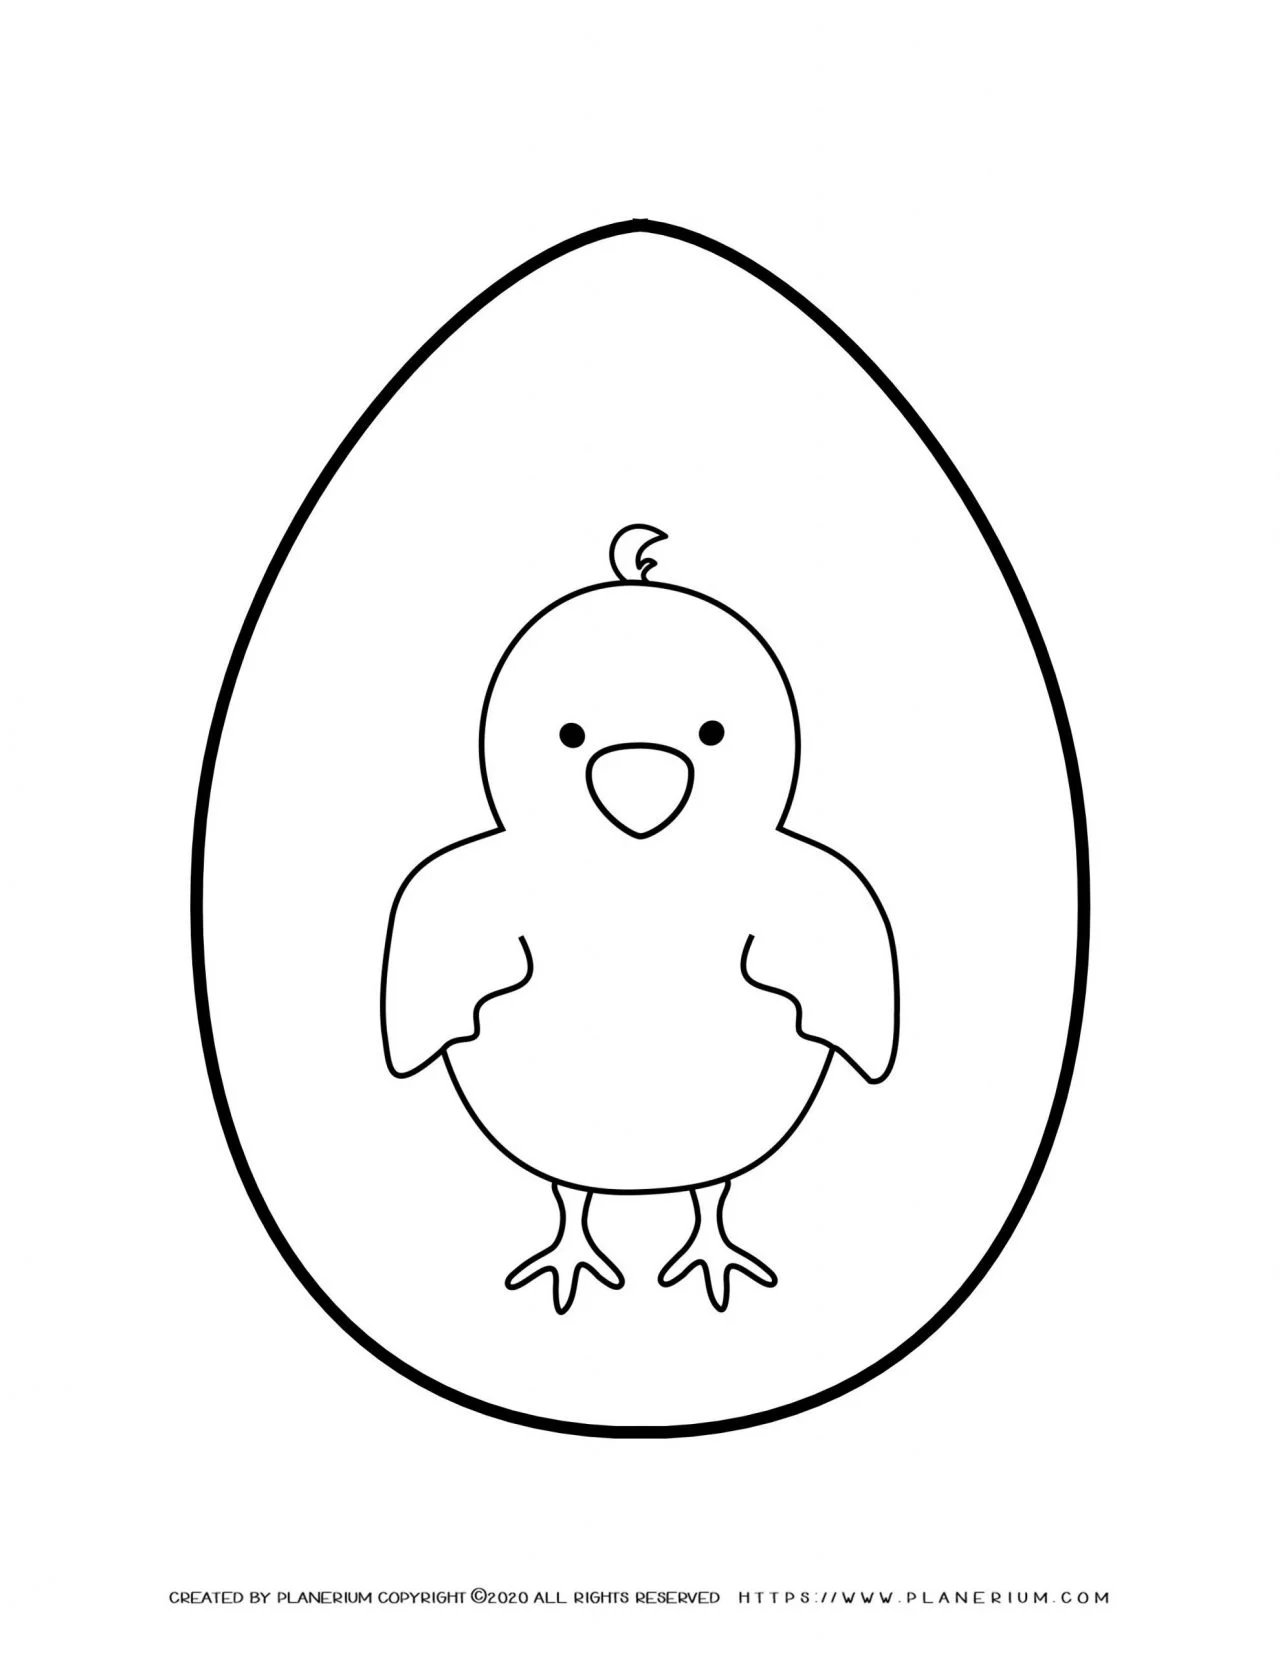 Cute chick stand inside an egg